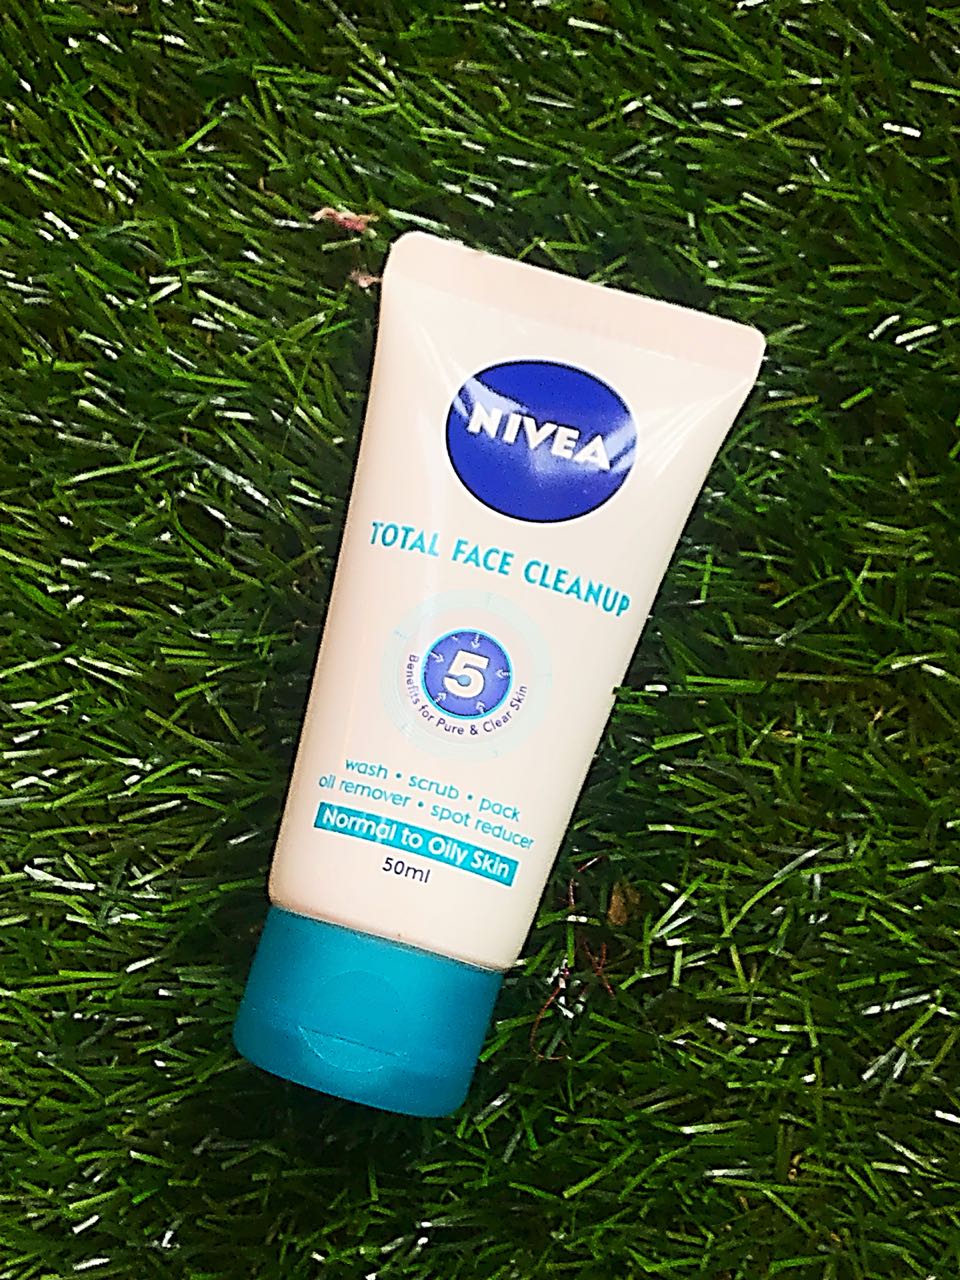 5 minutes for a total face clean up with Nivea!